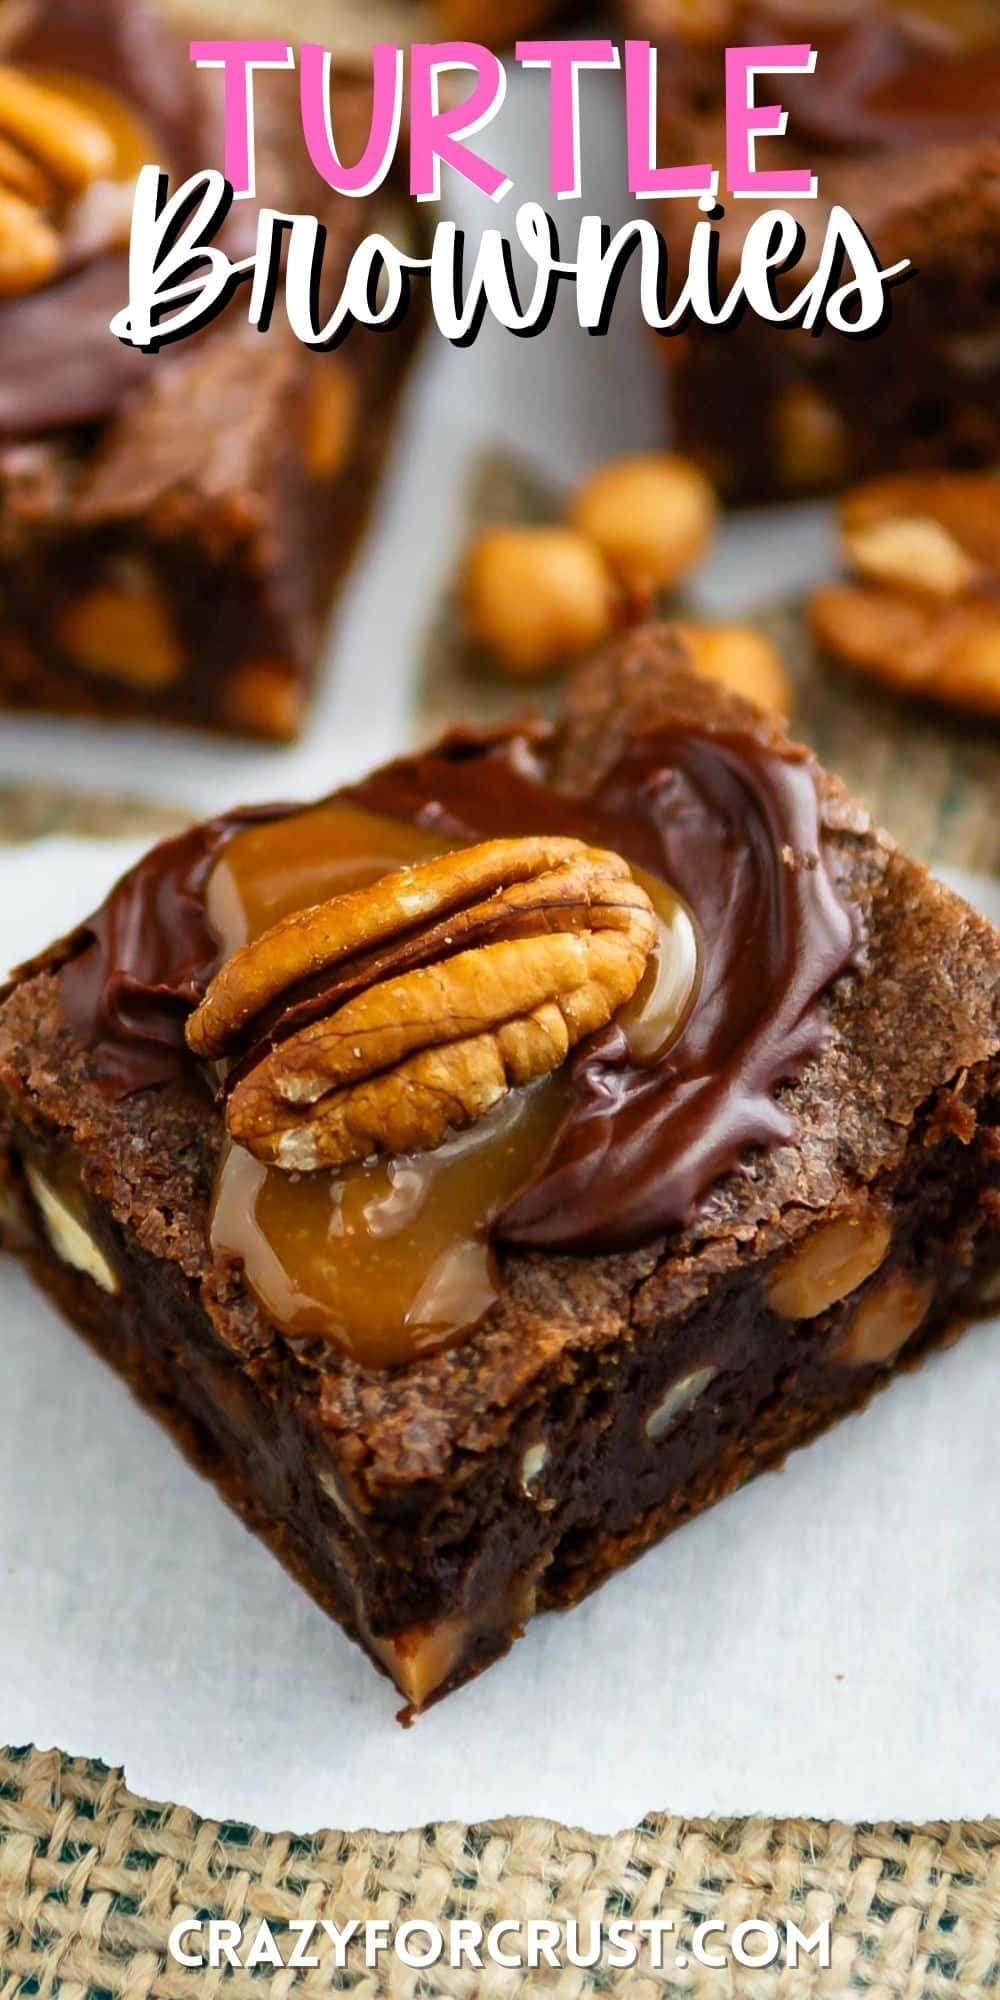 brownies with caramel and a pecan on top with words on the image.